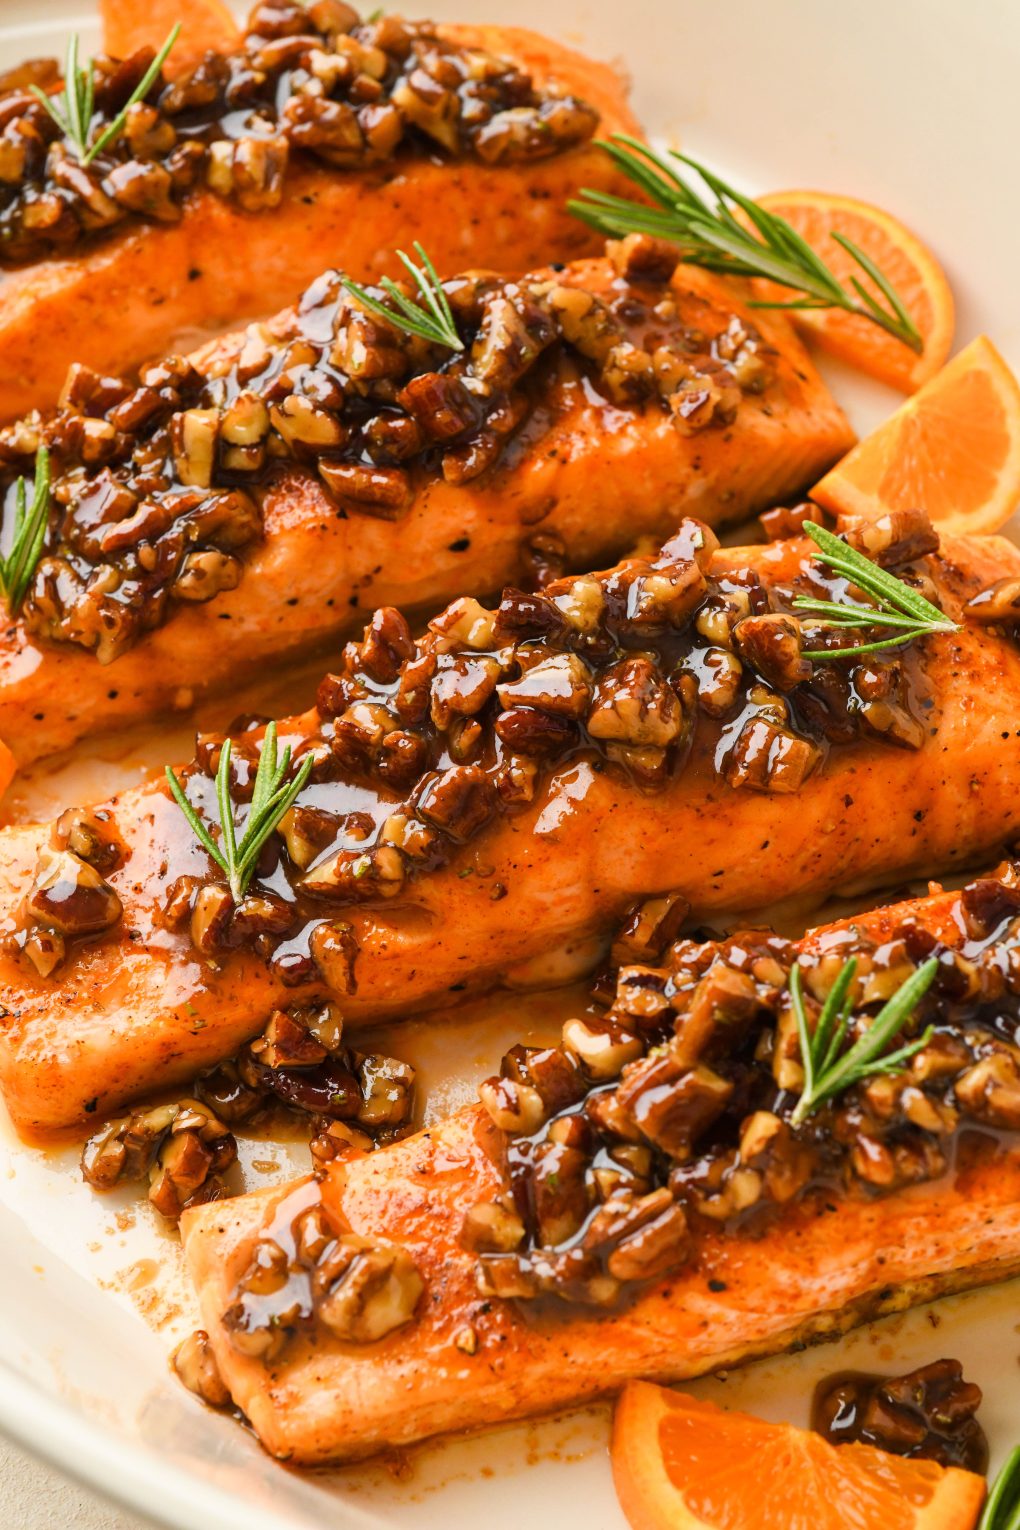 Close up image of oven baked maple pecan glazed salmon fillets in a ceramic baking dish, garnished with fresh rosemary. 